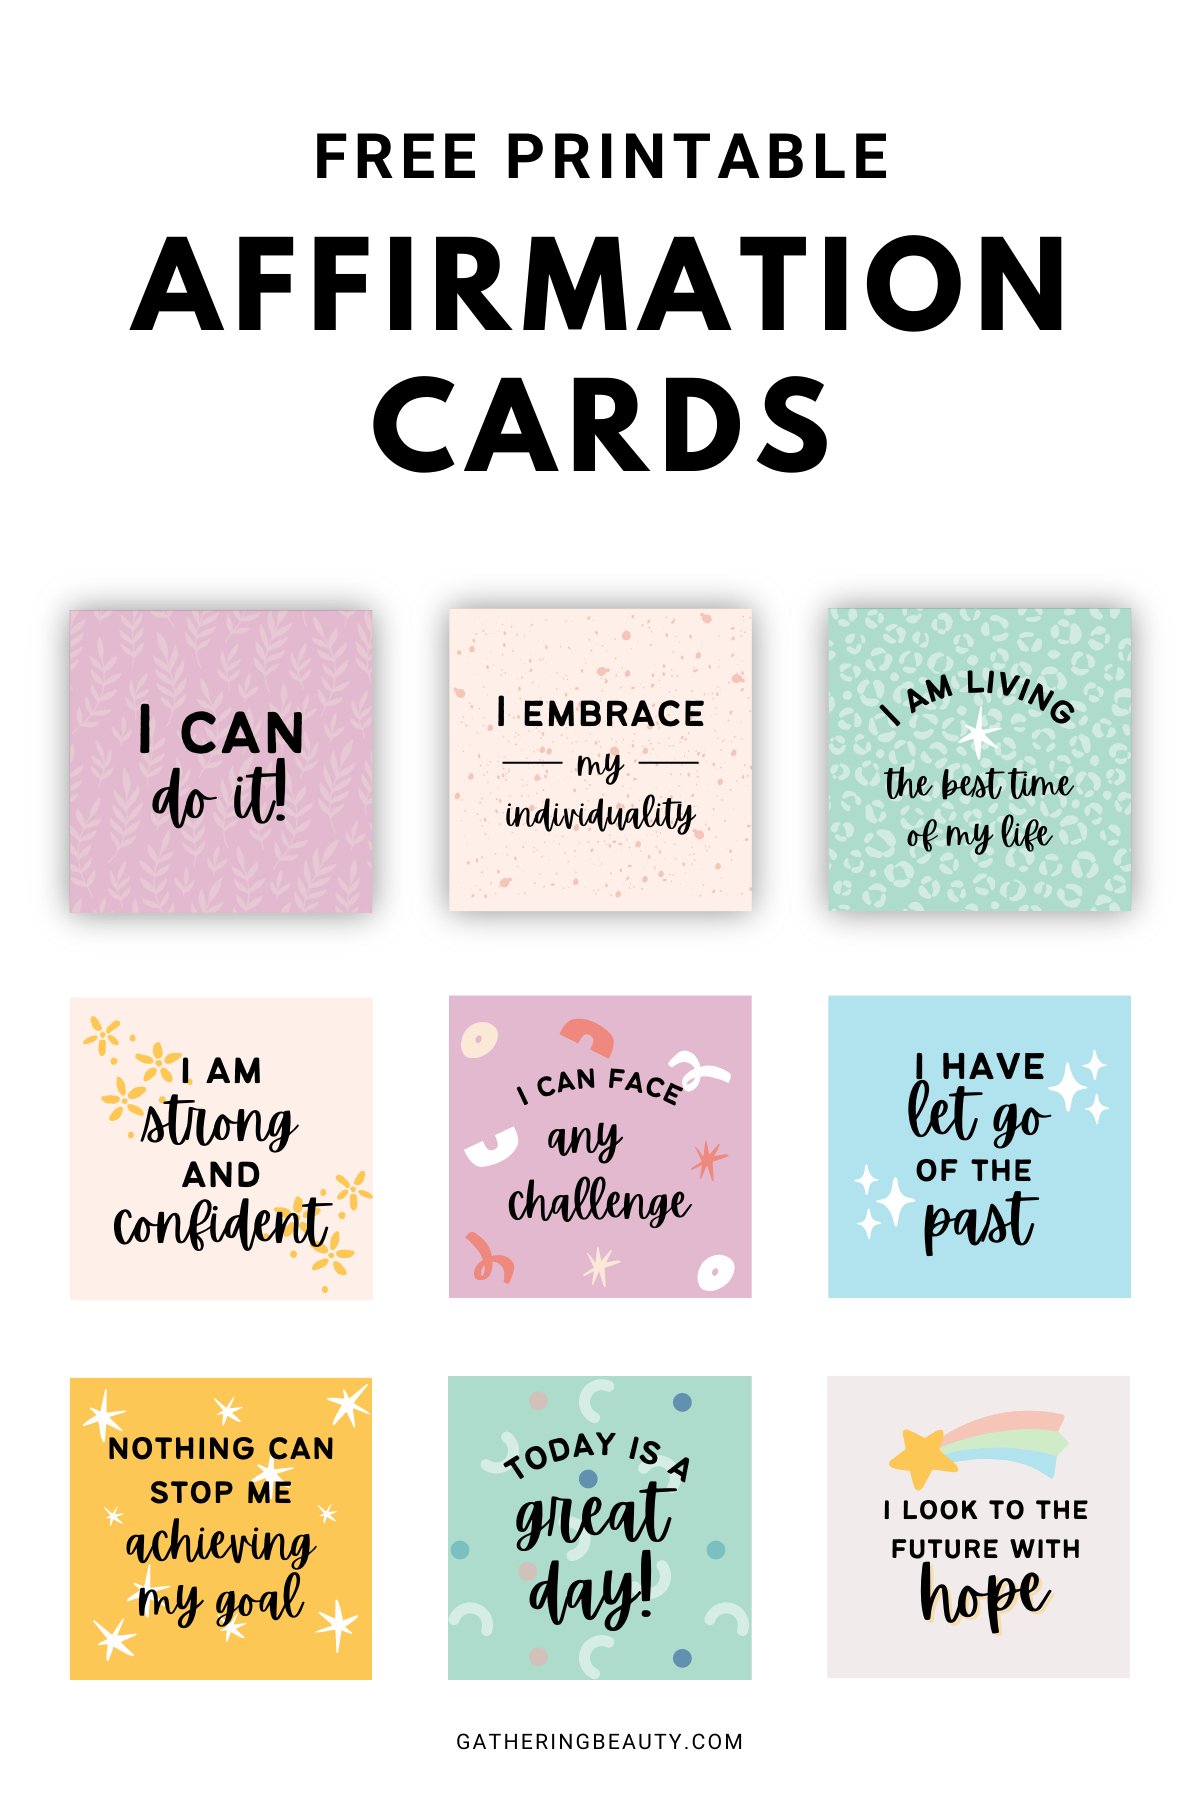 affirmation-cards-free-printable-gathering-beauty